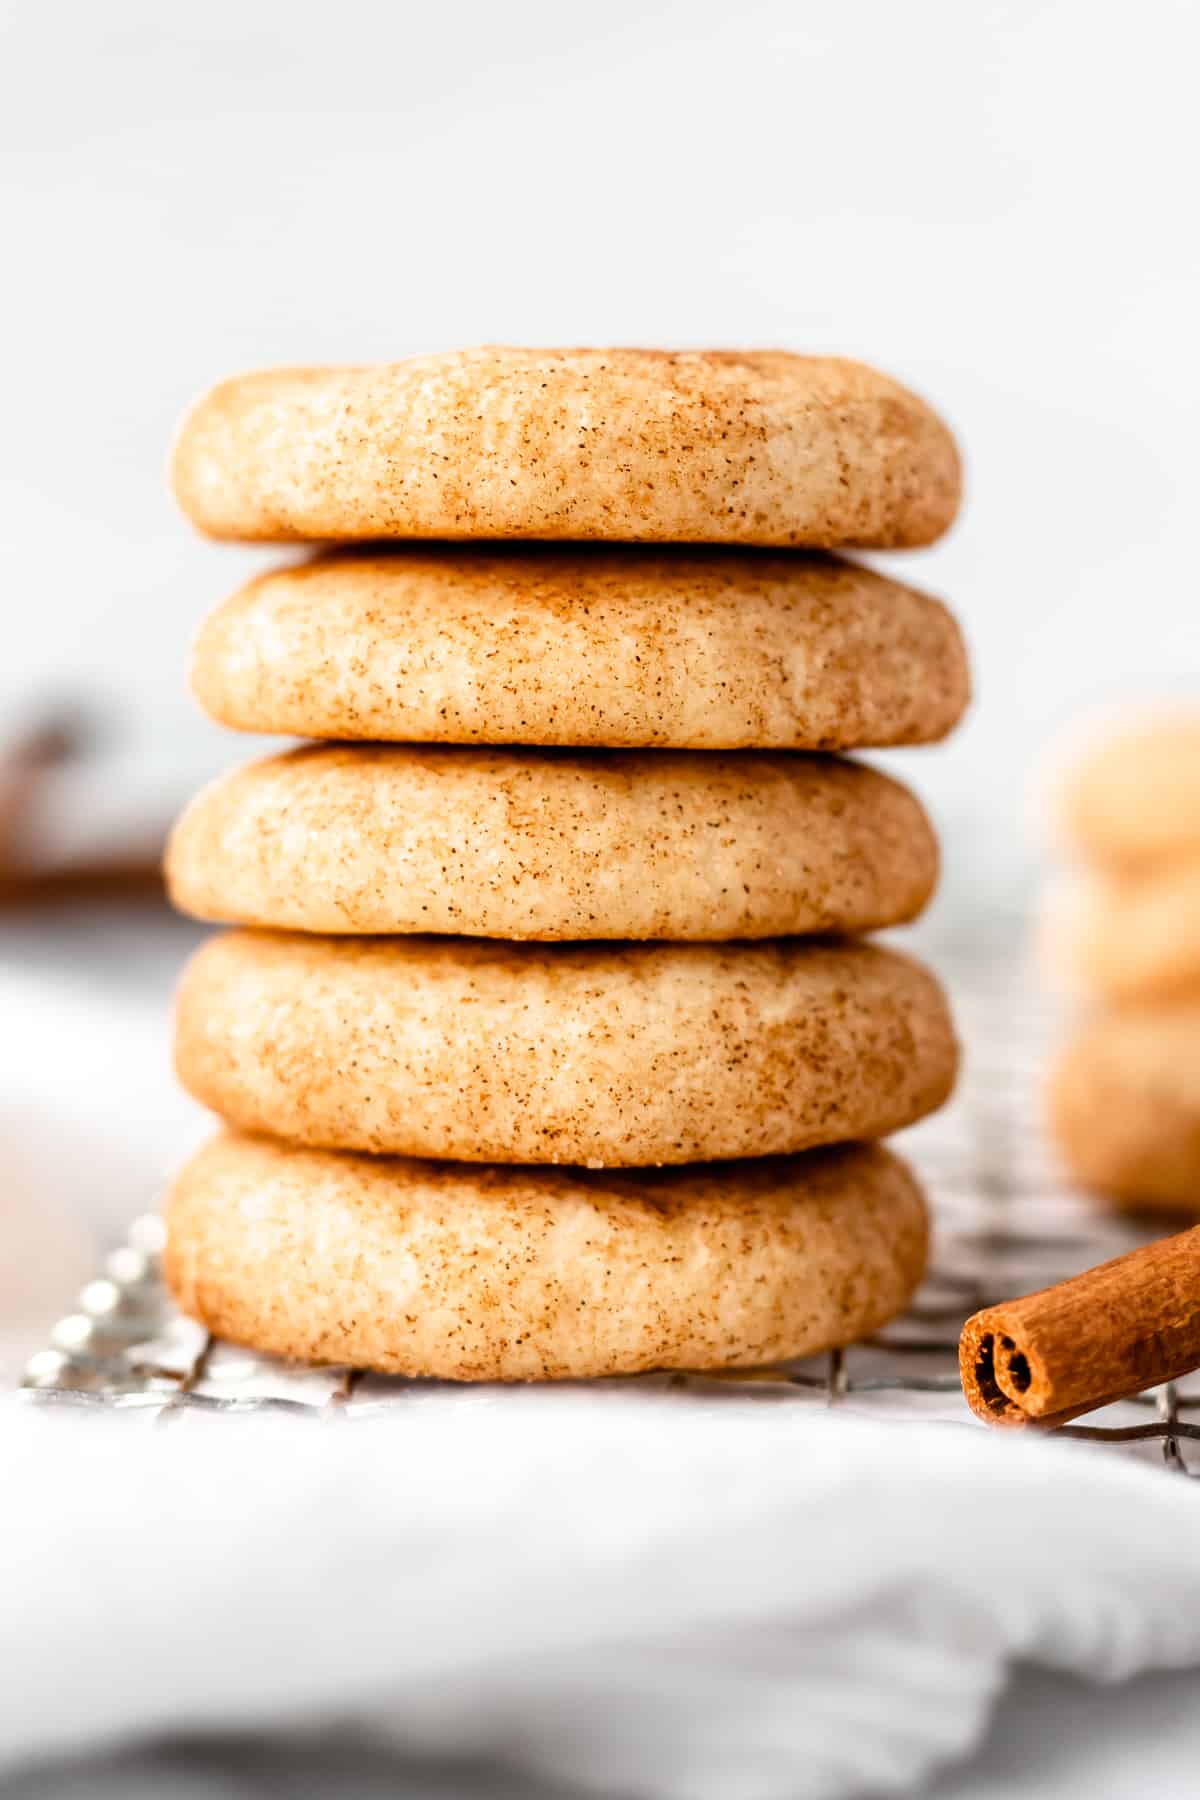 A stack of 5 snickerdoodle cookies on a cooling rack with cinnamon sticks and more cookies in the background.